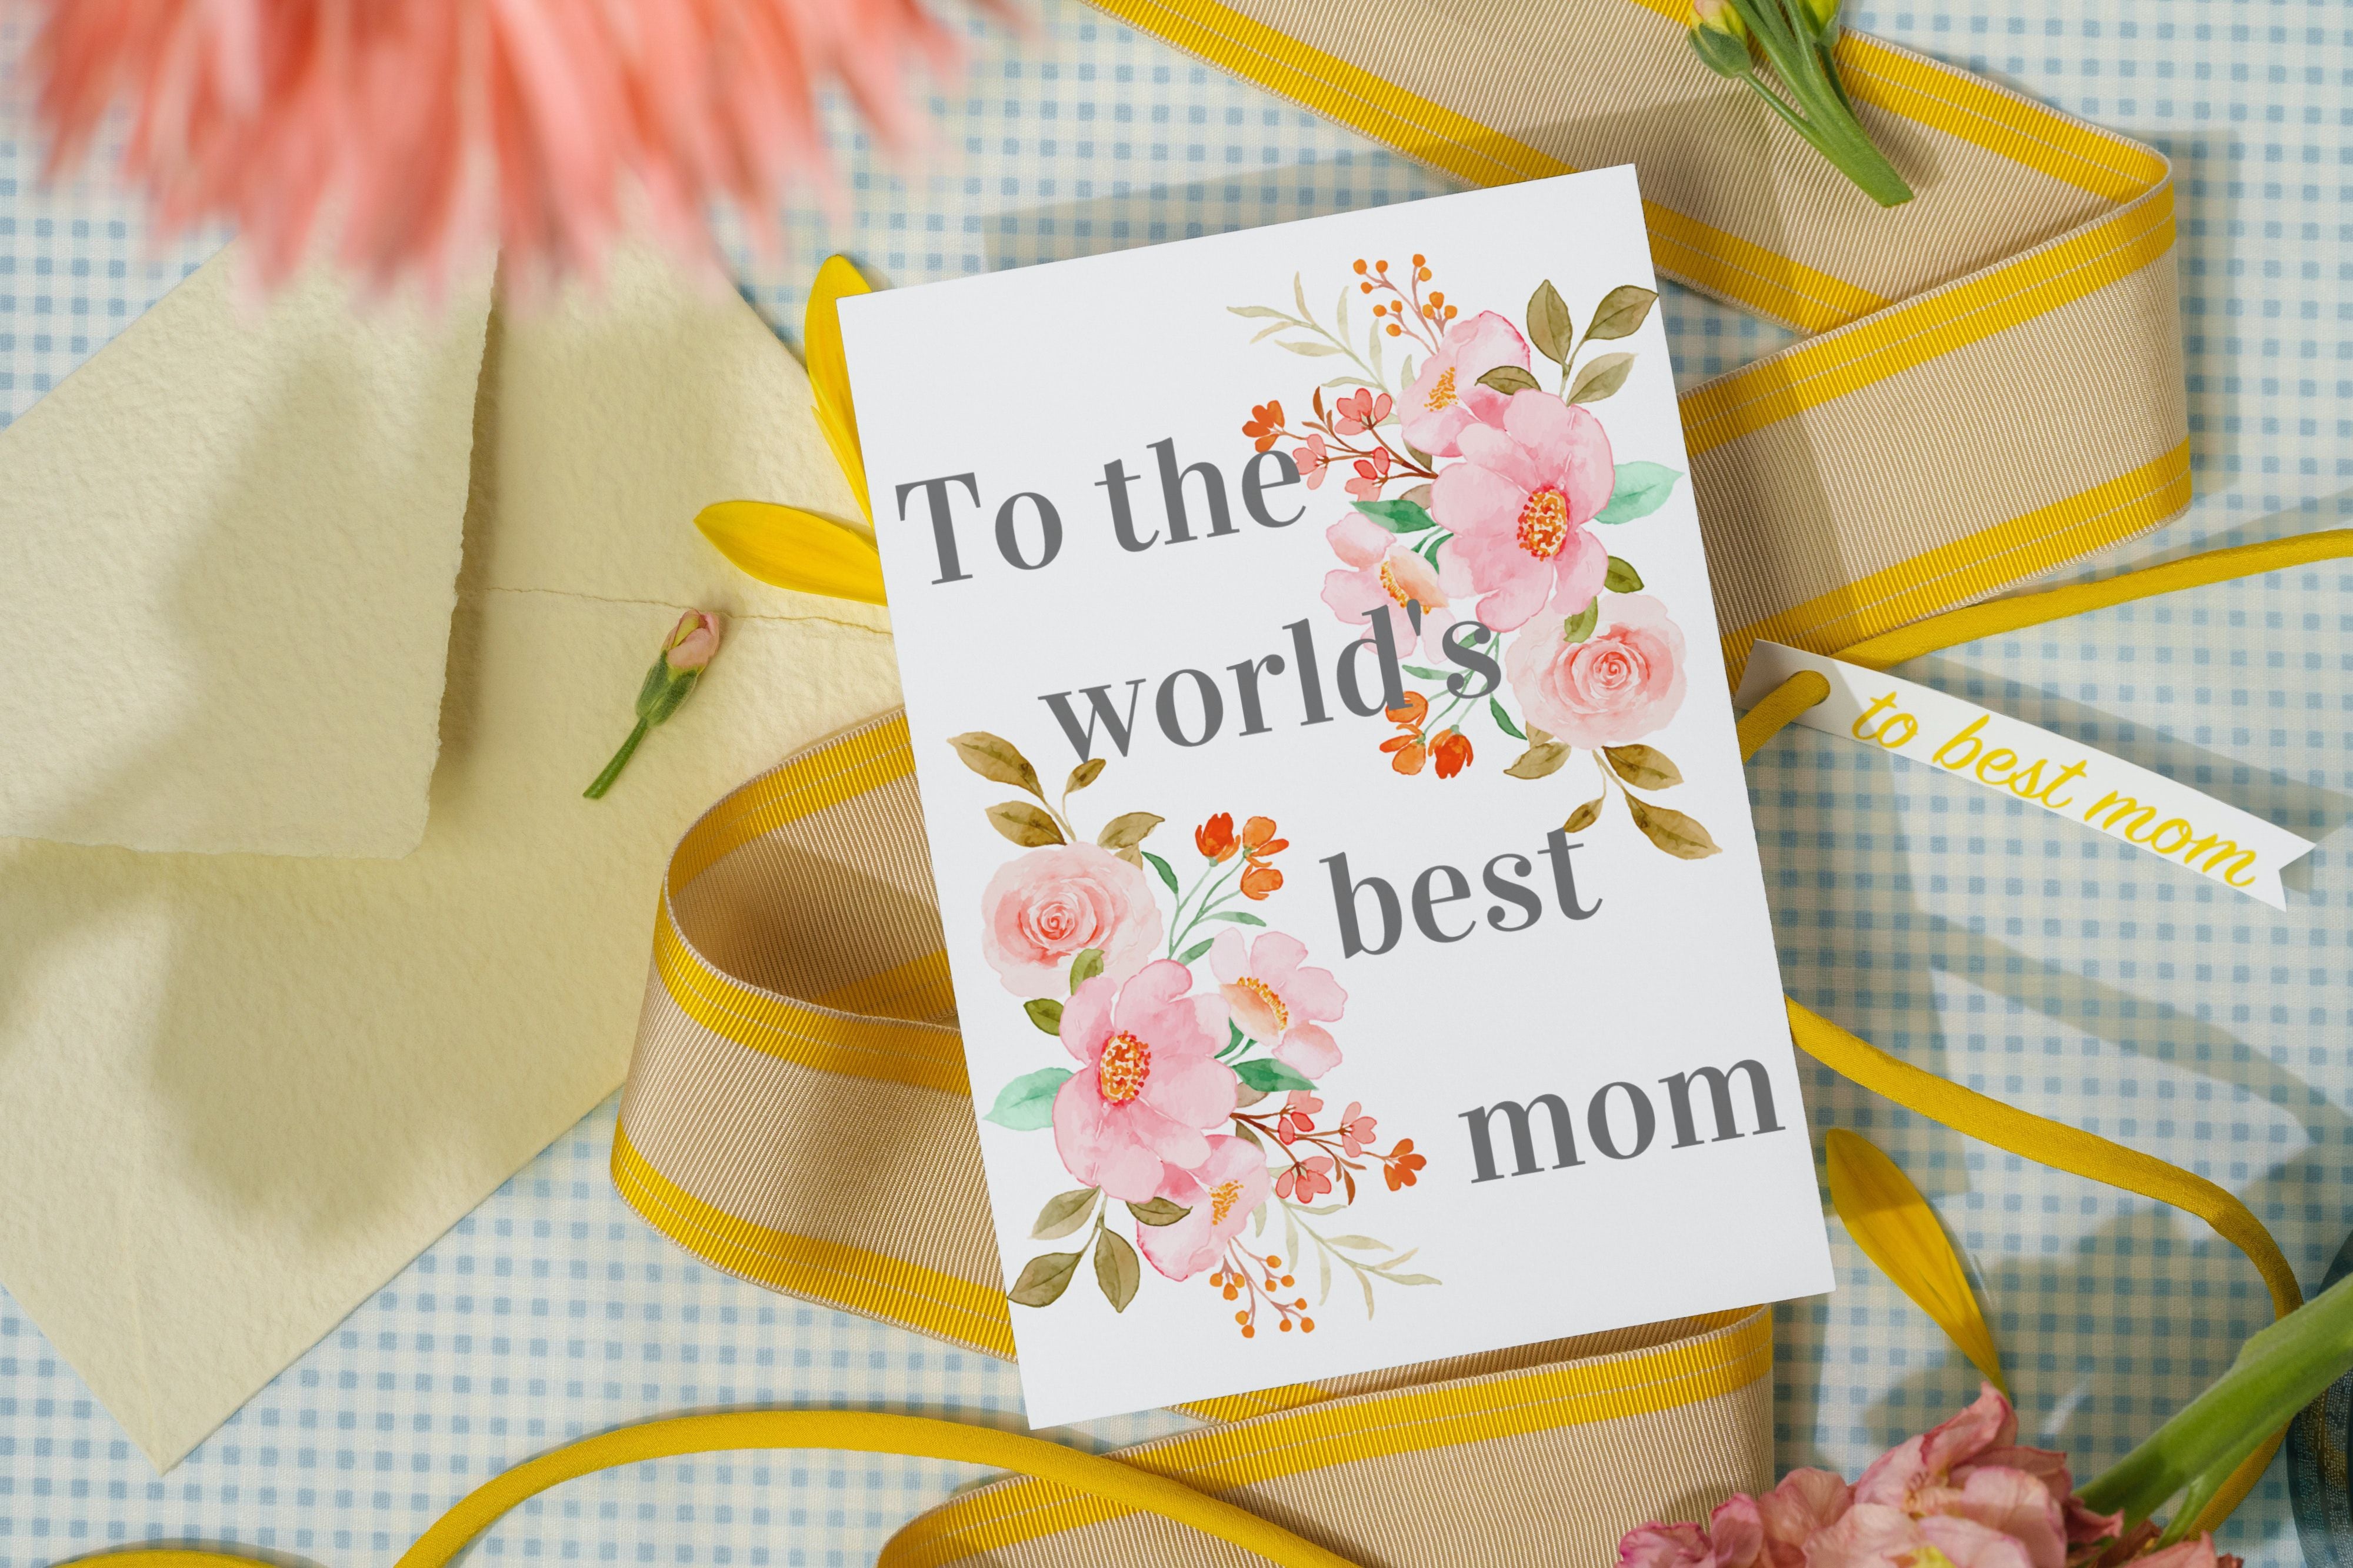 Floral card saying, To the world's best mom with ribbon, and flowers in background.